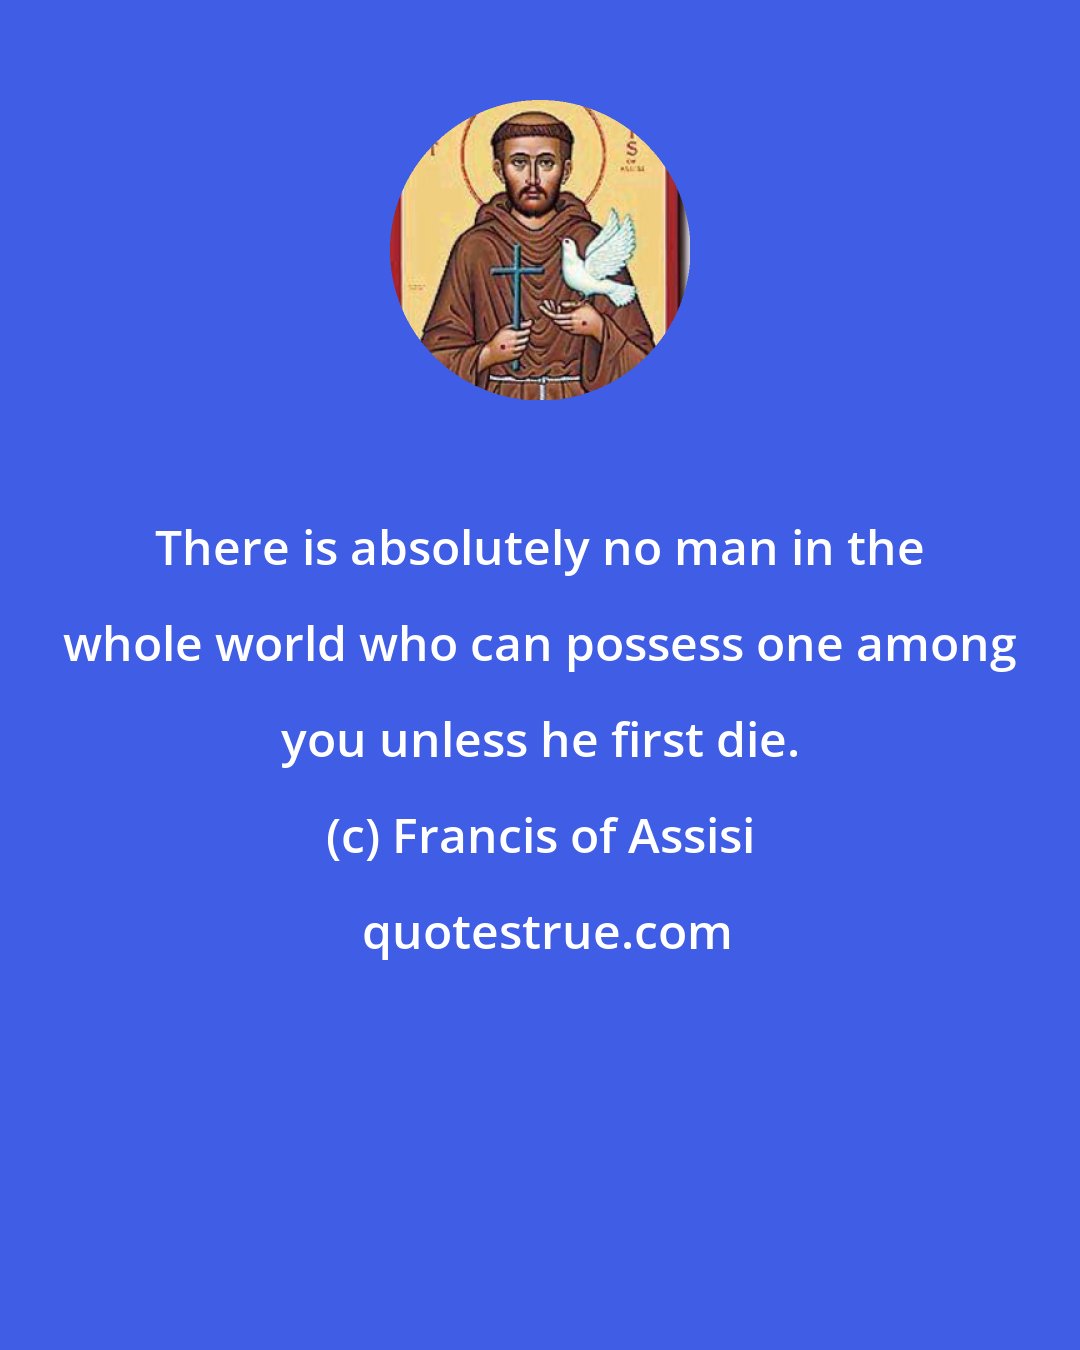 Francis of Assisi: There is absolutely no man in the whole world who can possess one among you unless he first die.